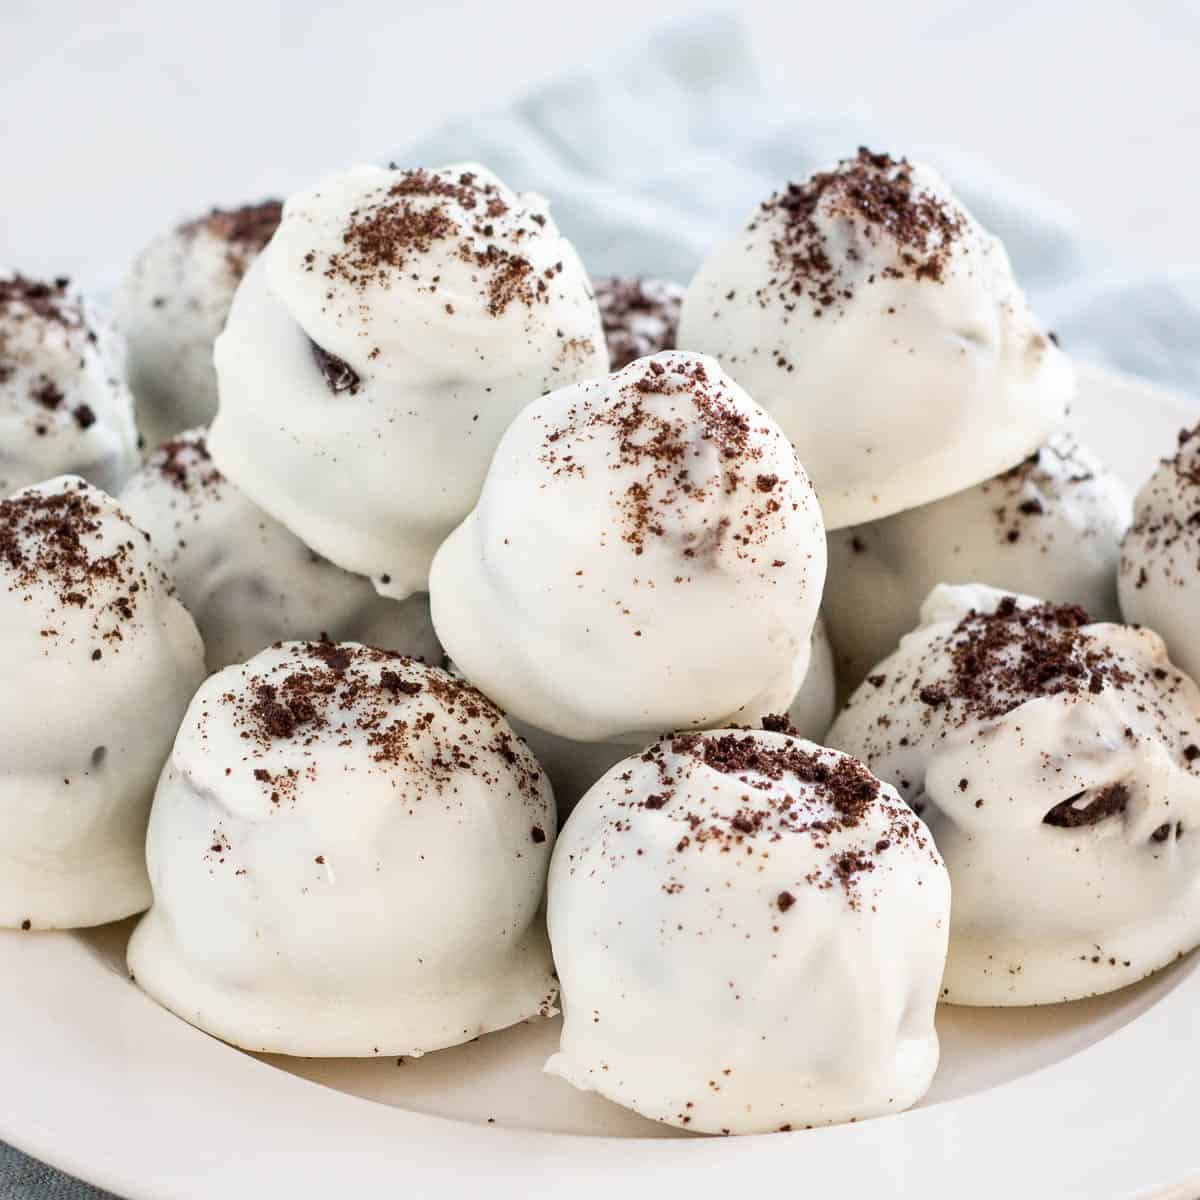 No Bake Oreo Balls covered in white chocolate and crushed oreo sprinkles.